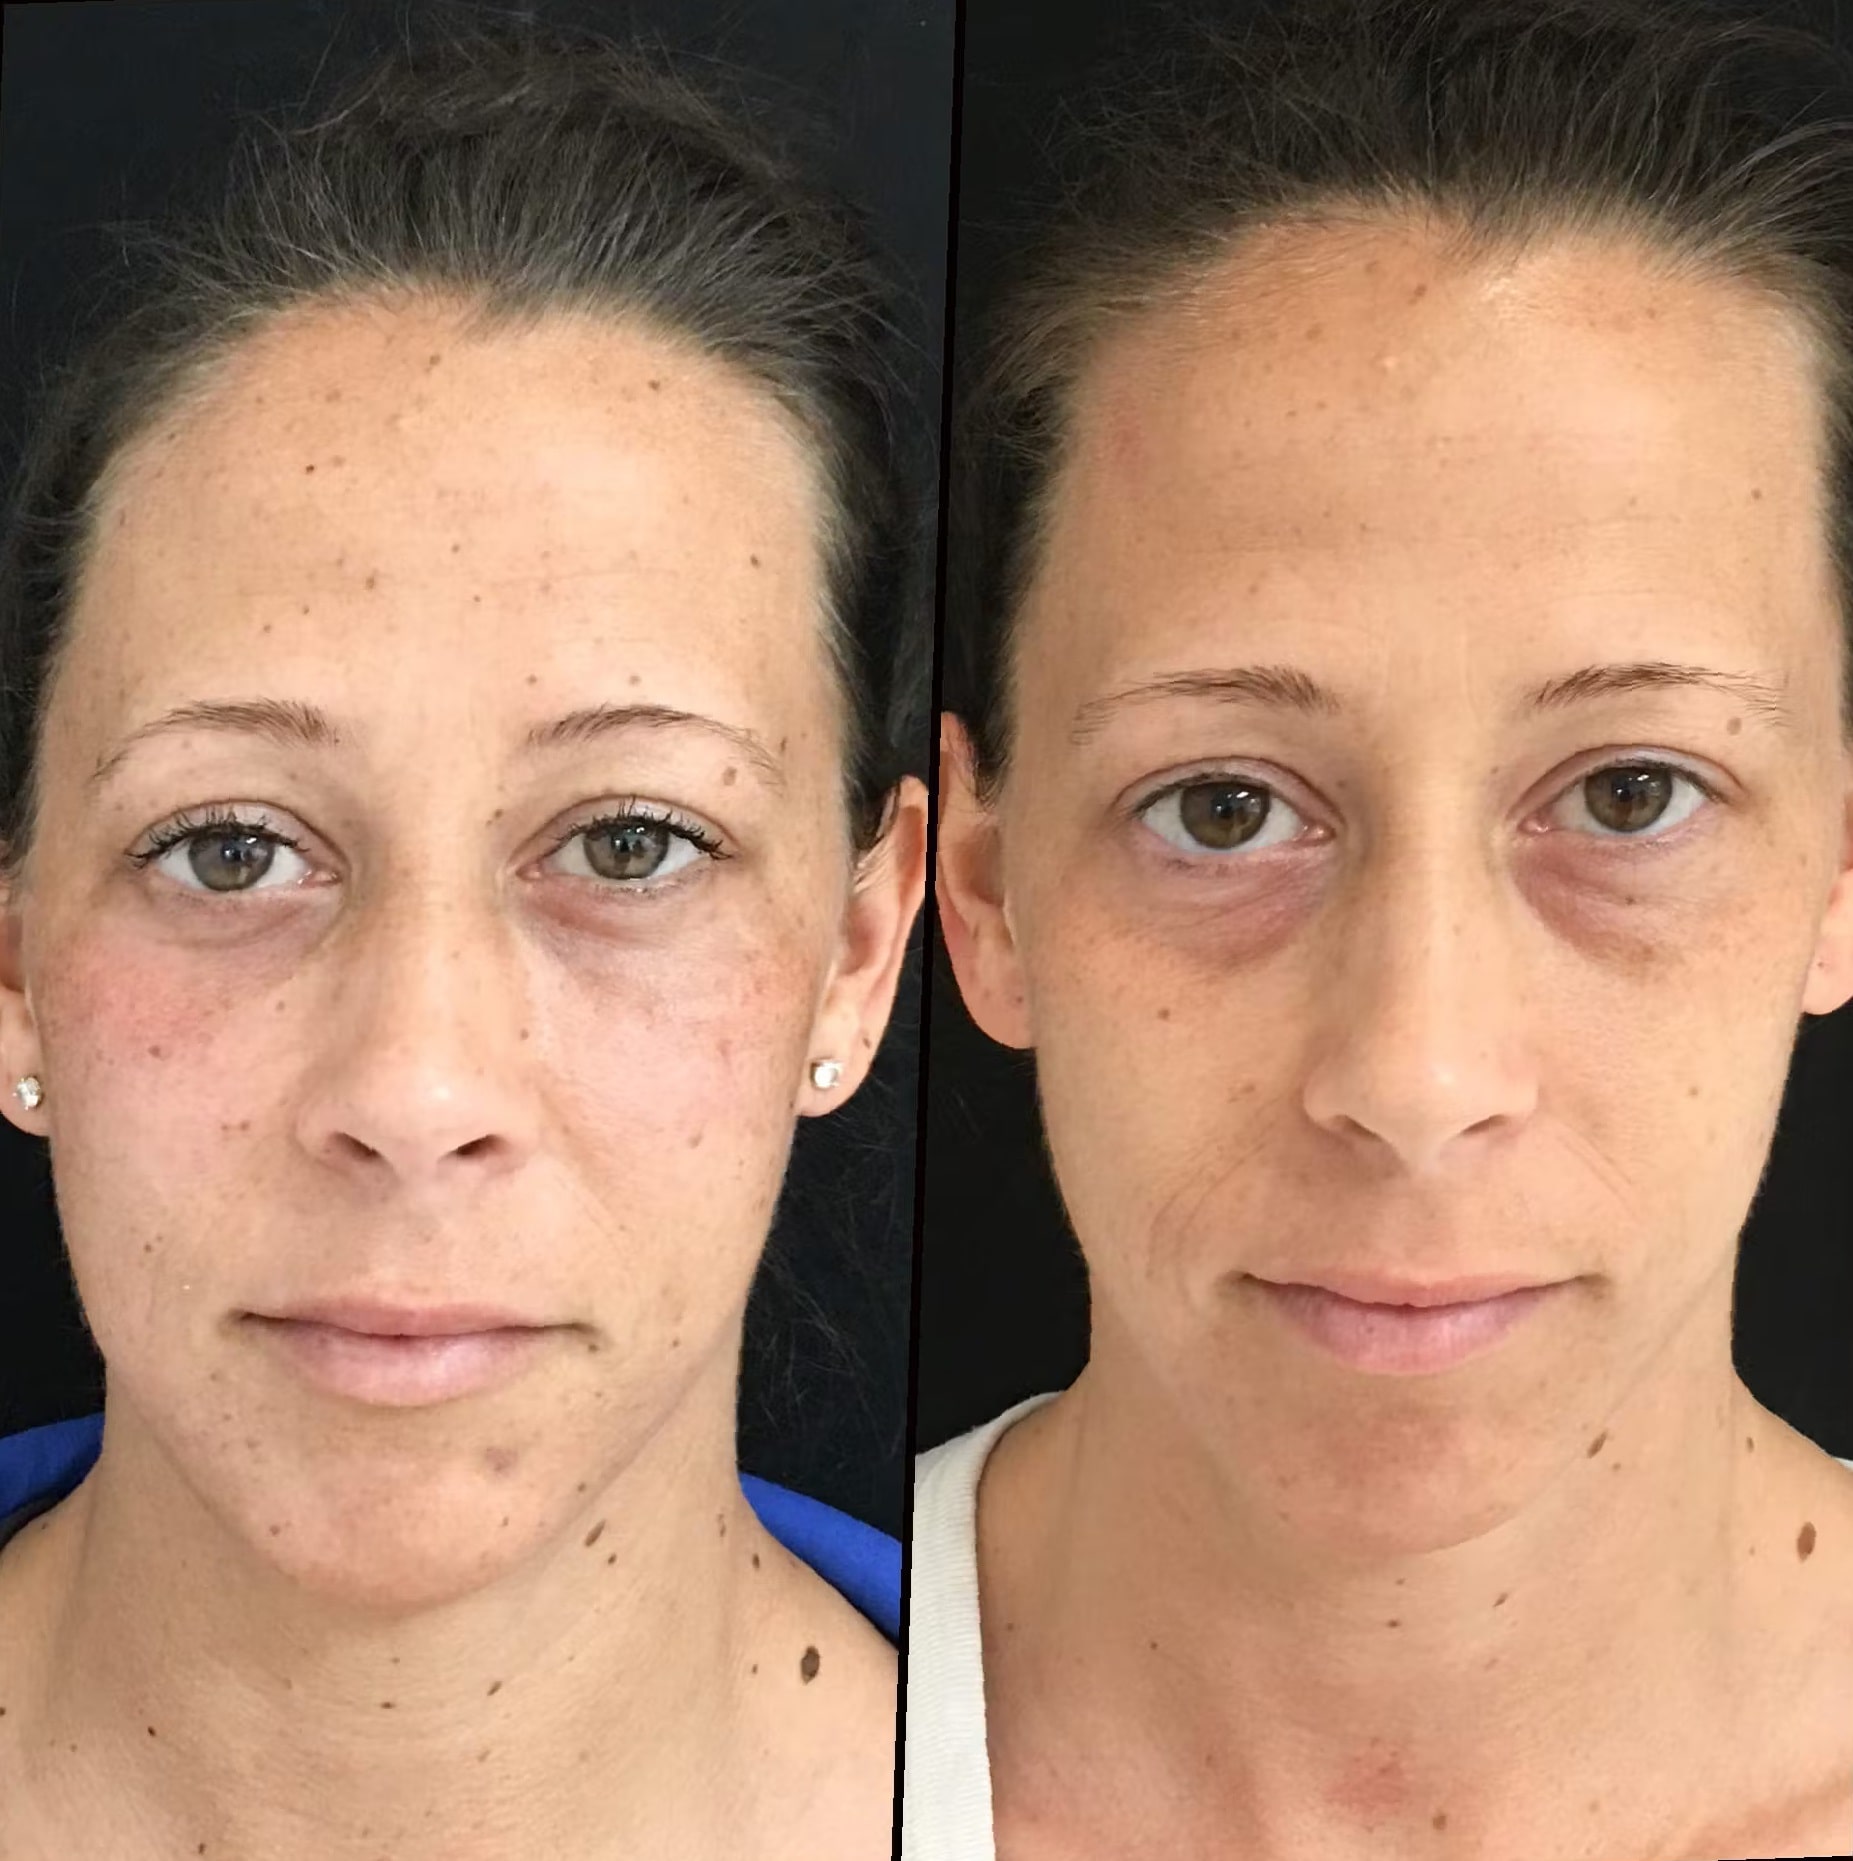 Blepharoplasty-Before-and-After-5